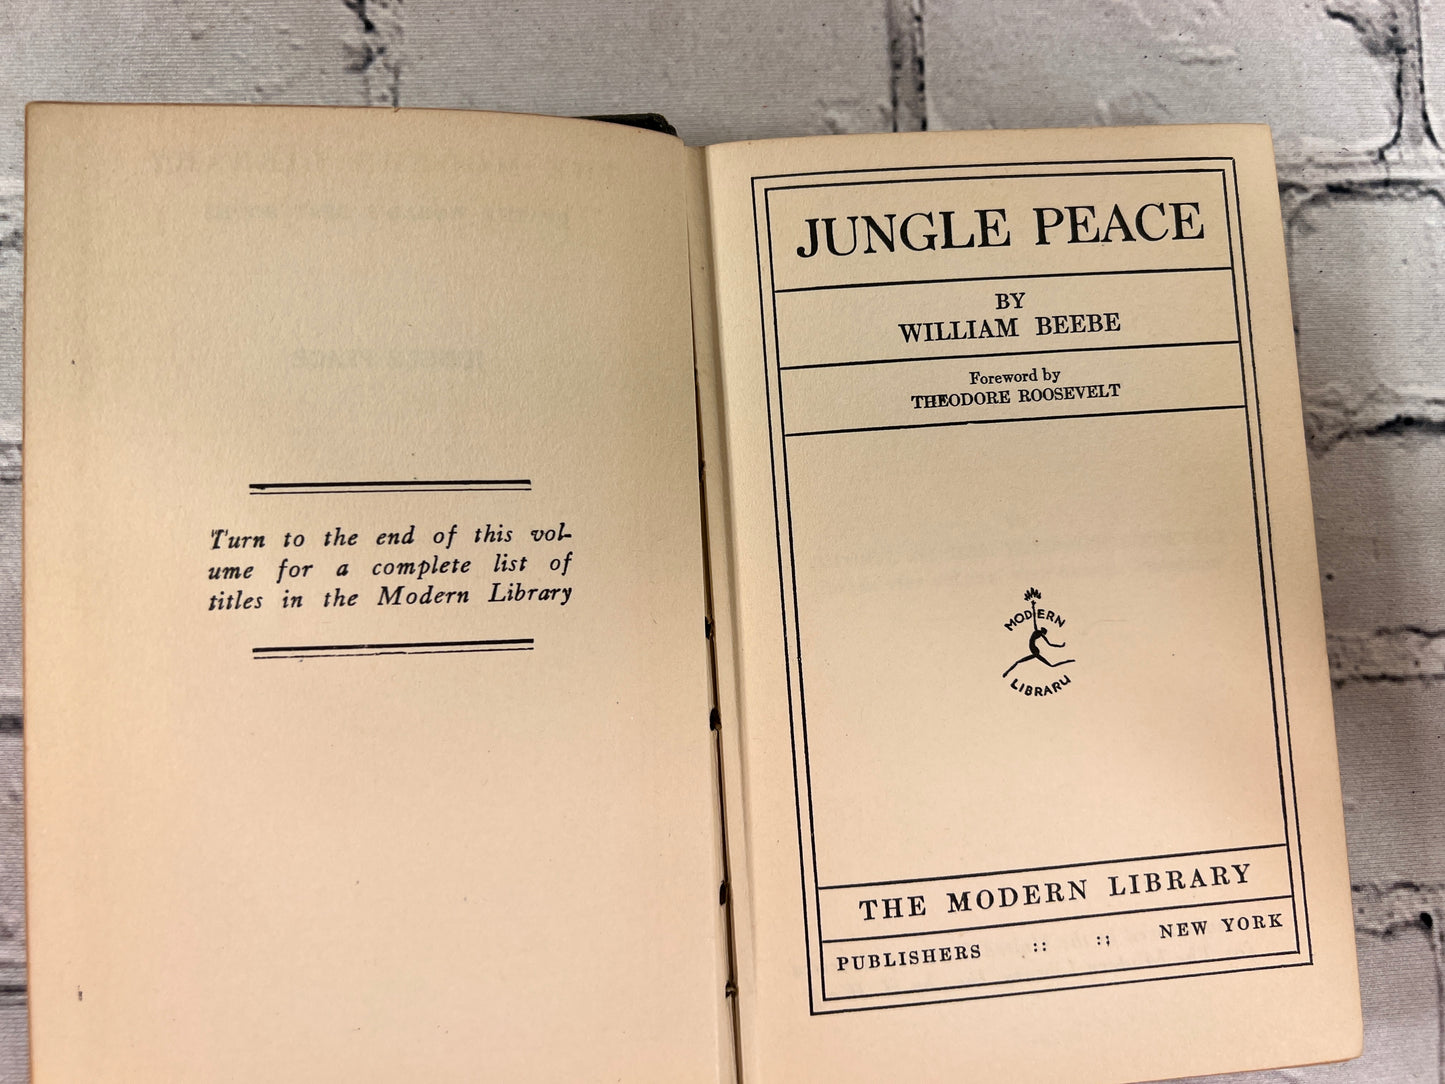 Jungle Peace by William Beebe